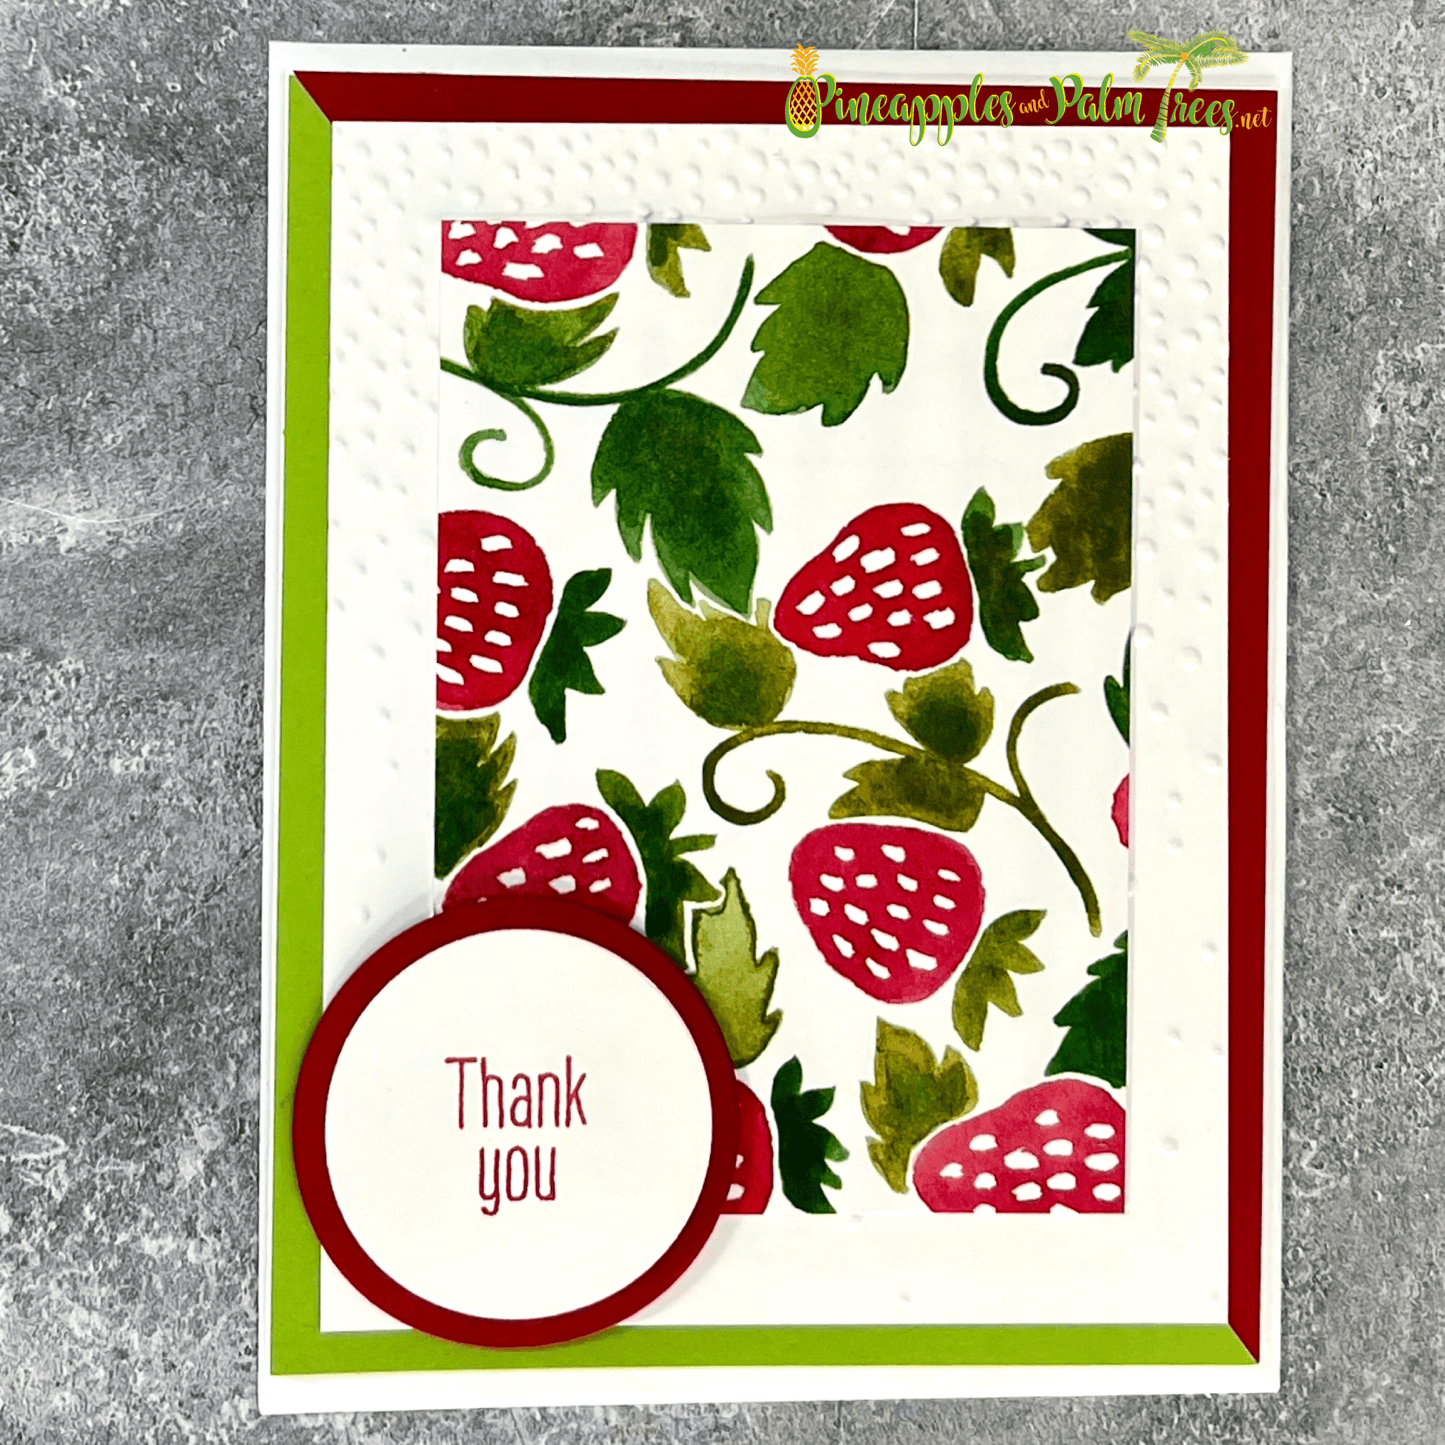 Greeting Card: Thank You. - strawberries